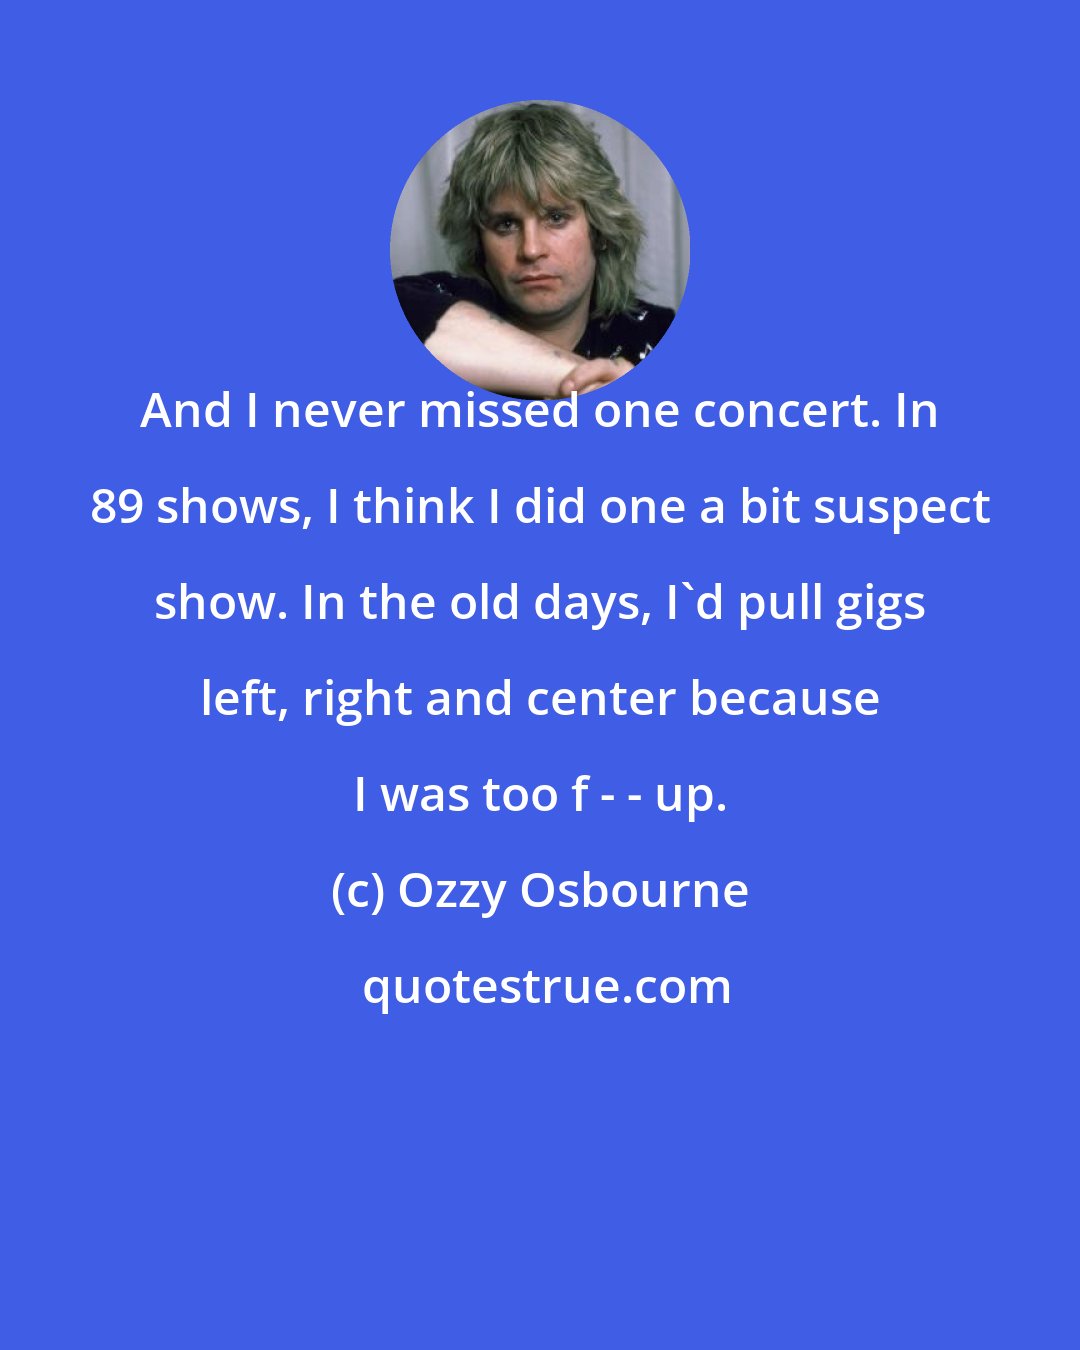 Ozzy Osbourne: And I never missed one concert. In 89 shows, I think I did one a bit suspect show. In the old days, I'd pull gigs left, right and center because I was too f - - up.